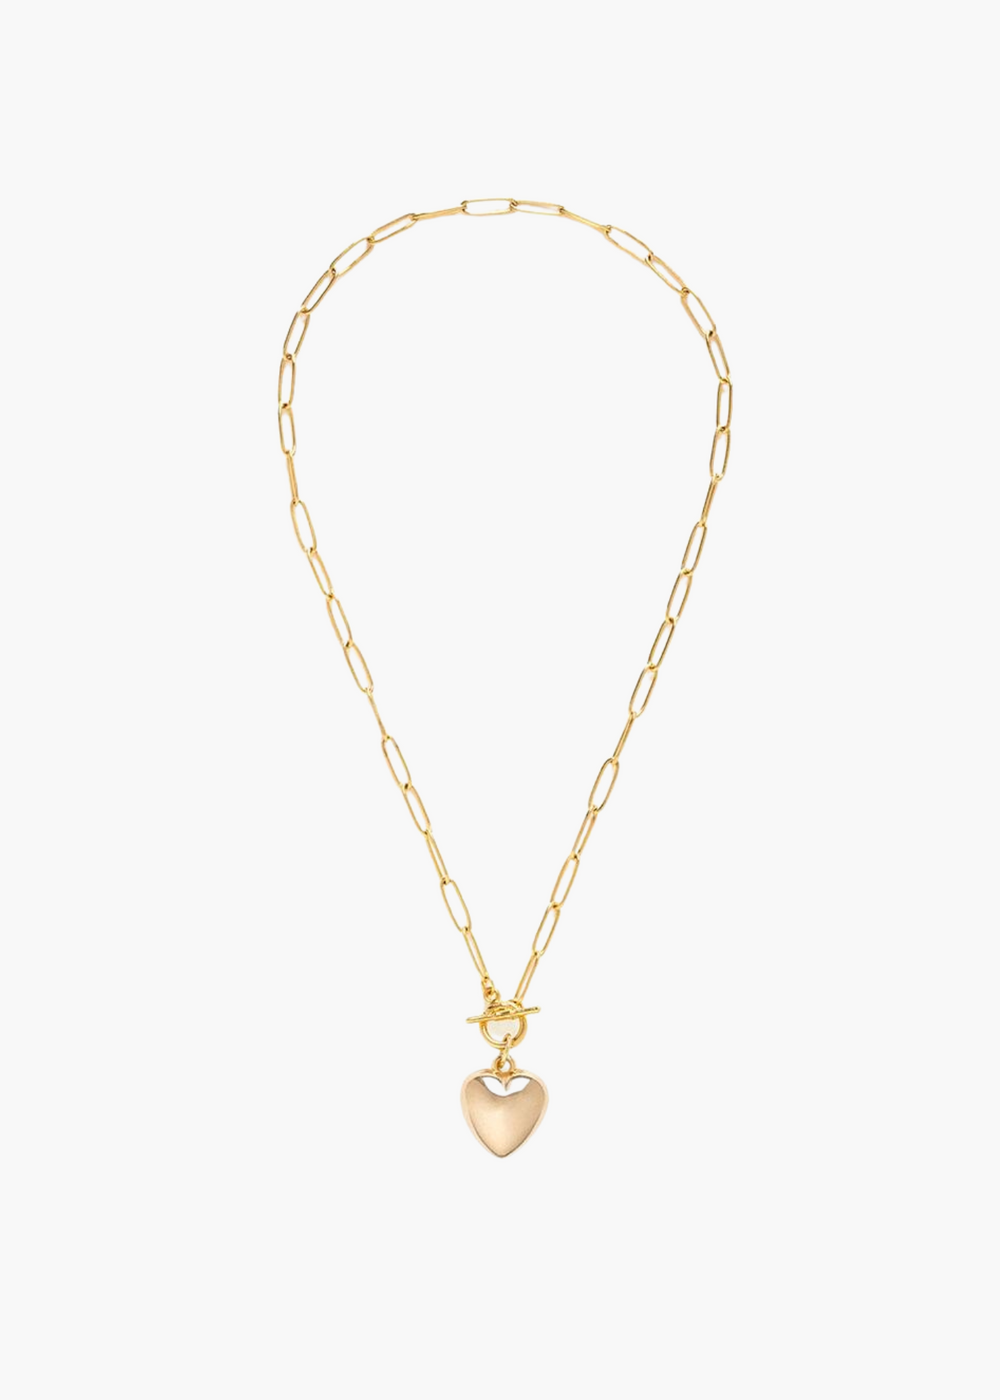 Puffy Gold Heart Toggle Necklace